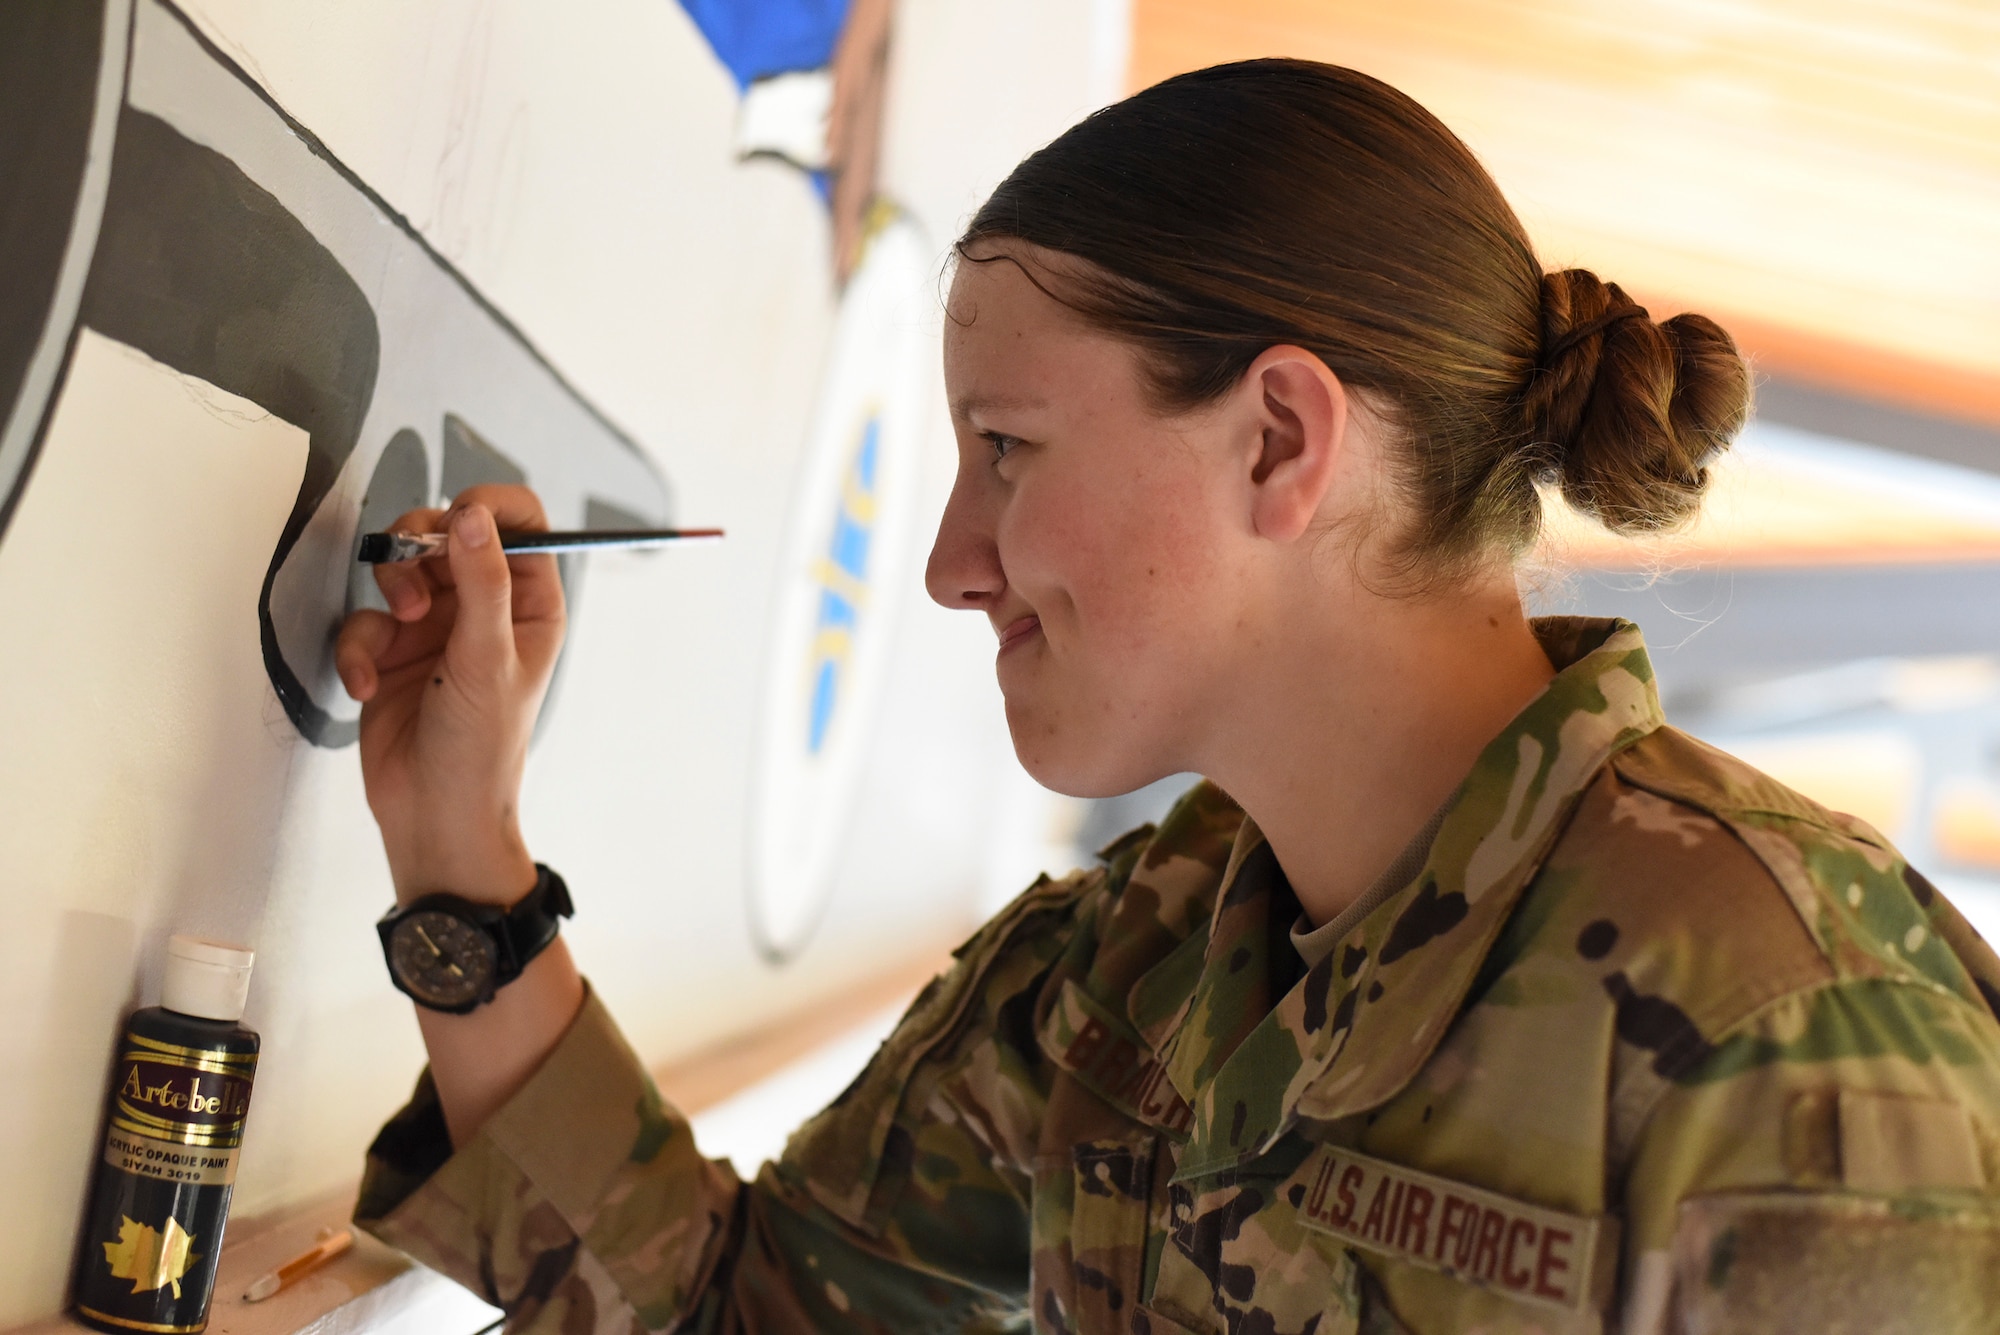 Airman First Class Amber Branch, 728th Air Mobility Squadron passenger services agent, paints a C-5 Galaxy on a mural in the squadron’s heritage room Feb. 1, 2019, at Incirlik Air Base, Turkey. The mural consisted of a yellow background, a blue folded flag, an eagle, a soldier’s cross silhouette, a compass, a K-loader and a C-5 Galaxy. (U.S. Air Force photo by Staff Sgt. Ceaira Tinsley)